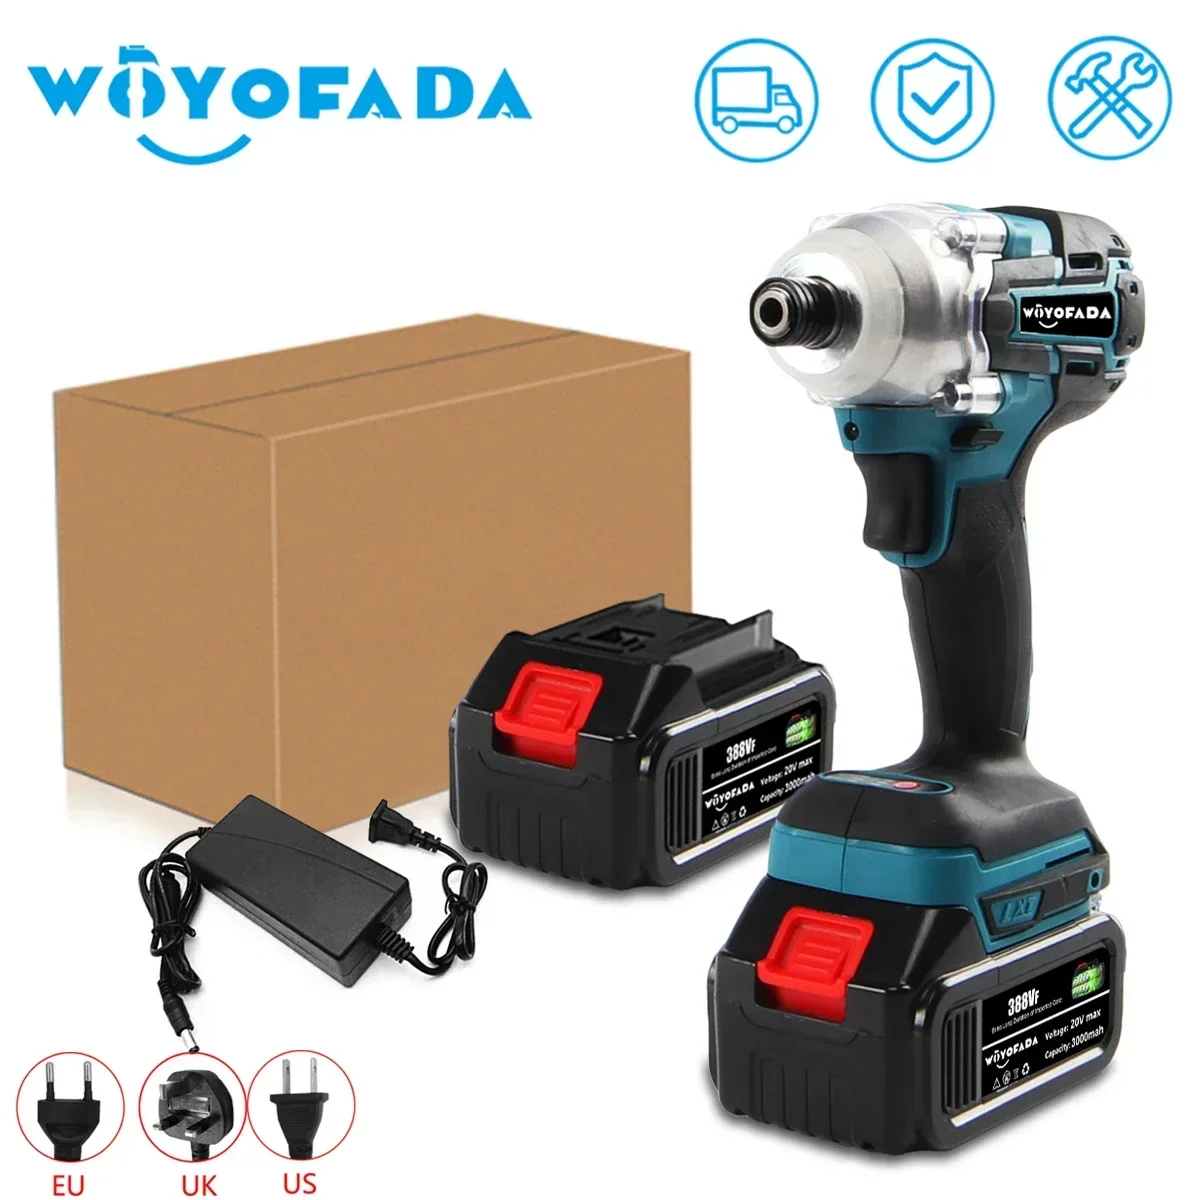 18V 350Nm Brushless Drill Cordless Electric Impact Wrench Rechargeable 1/4 Square Drive Wrench DIY Power Tool For Makita Battery a230 0602 x009x008 servo drive battery box